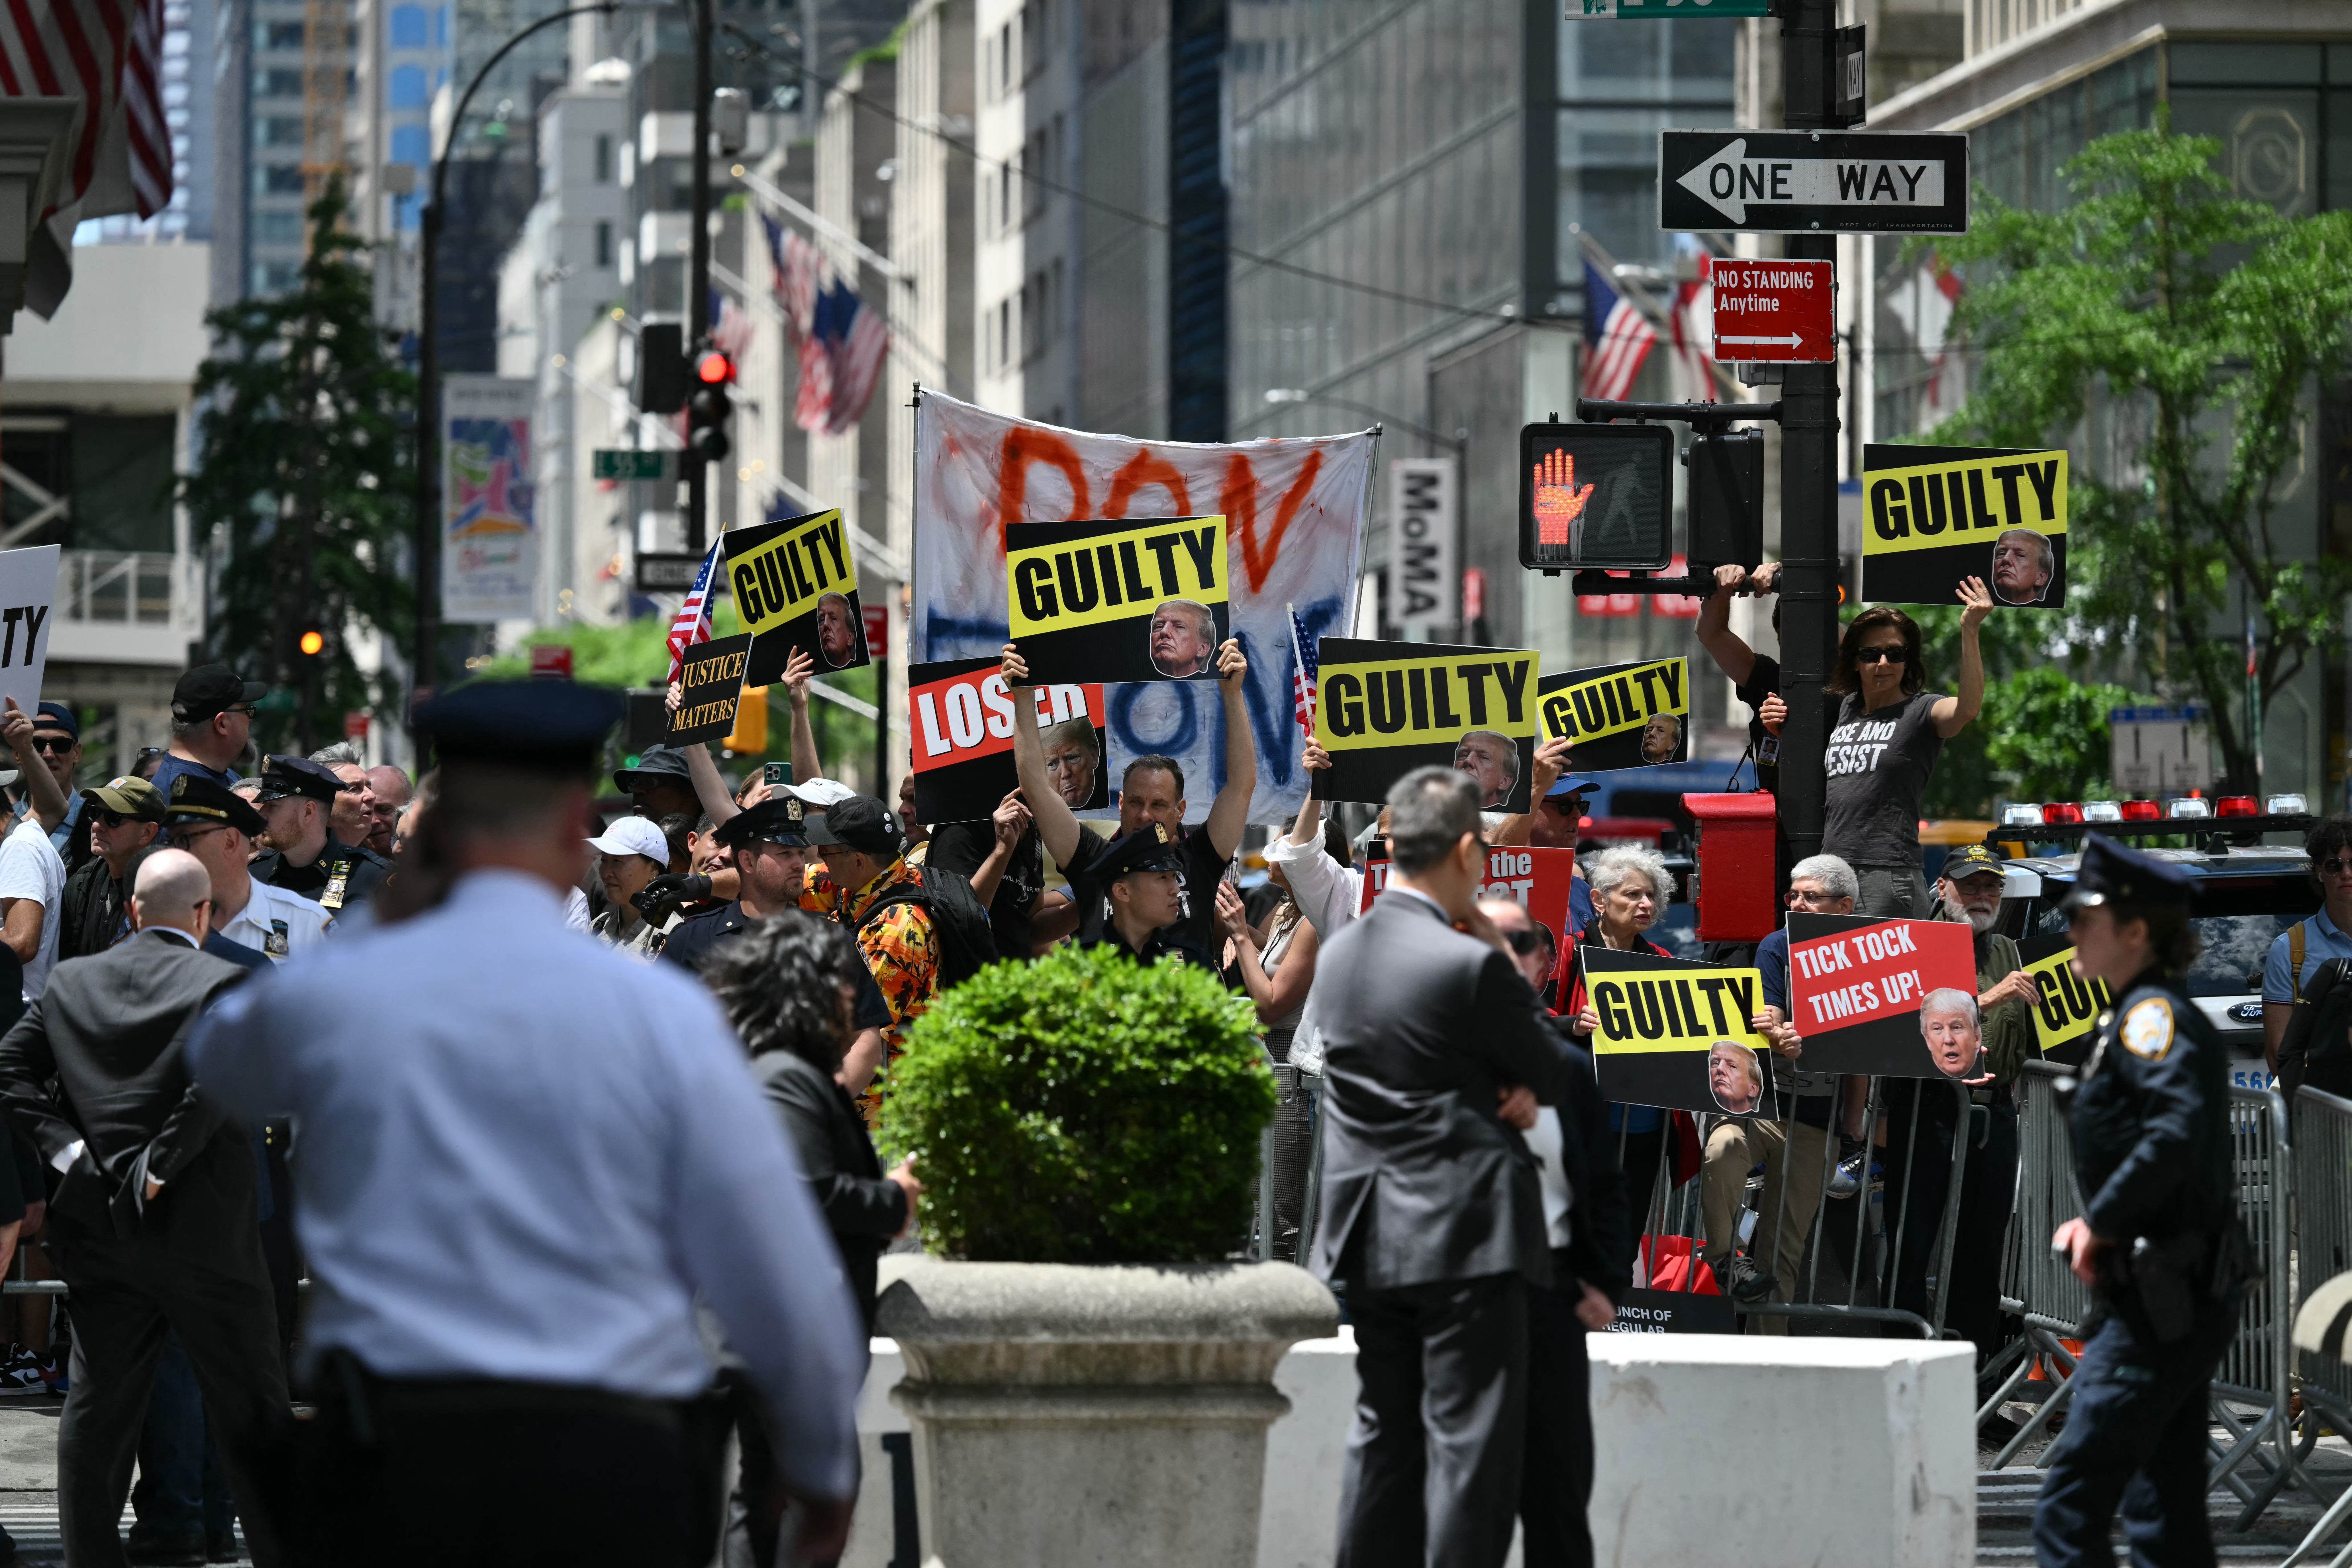 Anti-Trump demonstrators protest outside Trump Tower in New York on May 31.